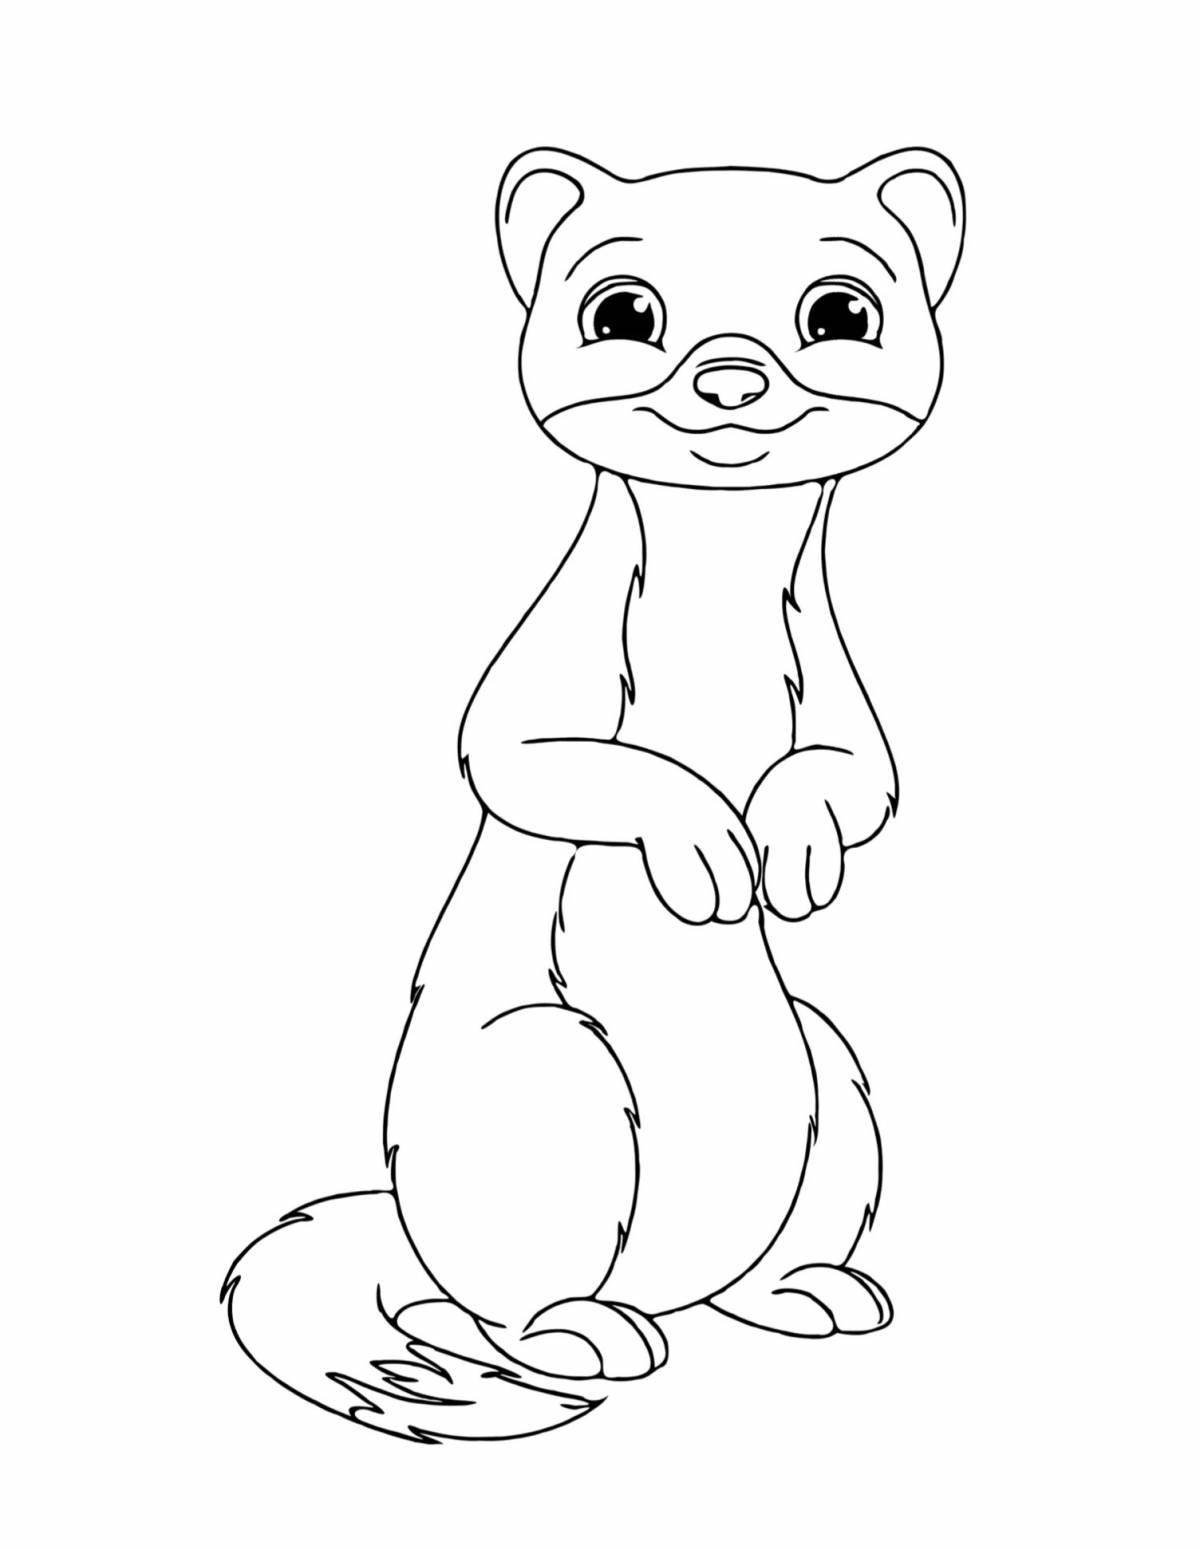 Delightful weasel coloring book for kids